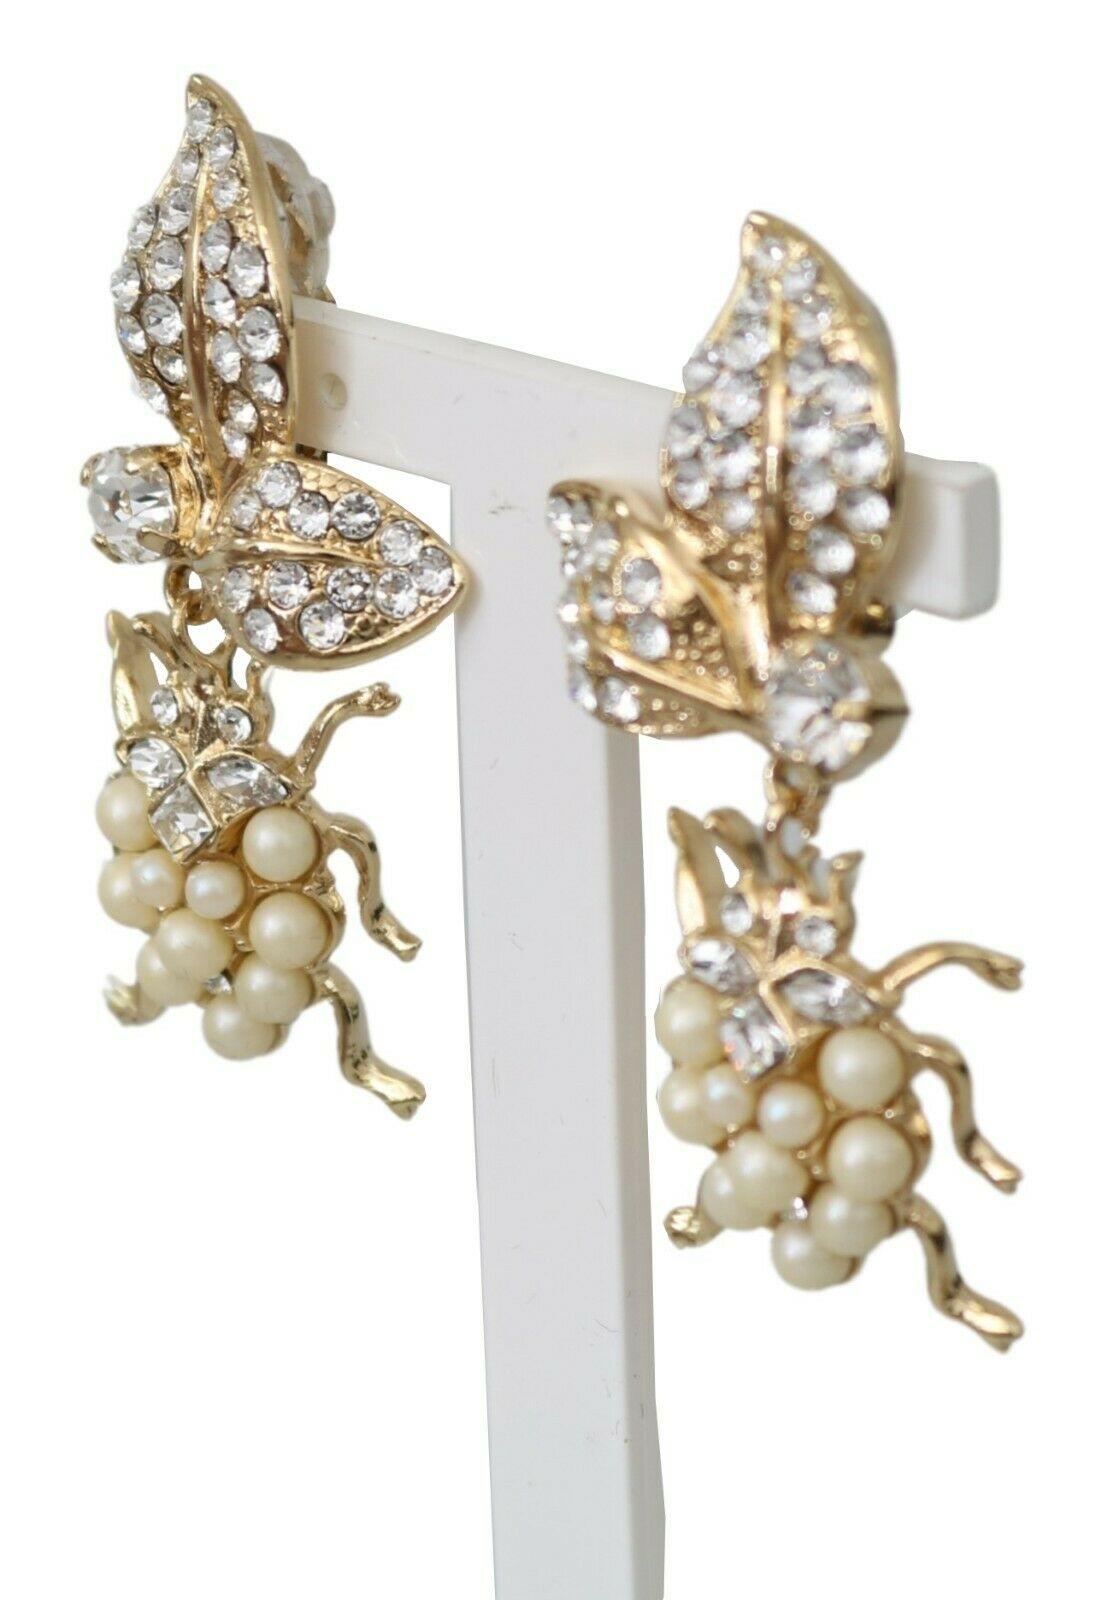 100% Authentic Dolce & Gabbana FAUX PEARLS & LIGHT CRYSTALS BUGS EARRINGS 
 
 
 • CLIP ON DANGLING 
 
 • BUGS MOTIVE 
 
 • MATERIAL: 60% OTTONE 10% PLASTIC 30% VETRO 
 
 • COLOR: WHITE, SILVER 
 
 • CRYSTALS: CLEAR 

 • LENGTH: 5.5cm 
 
 • DELIVERED